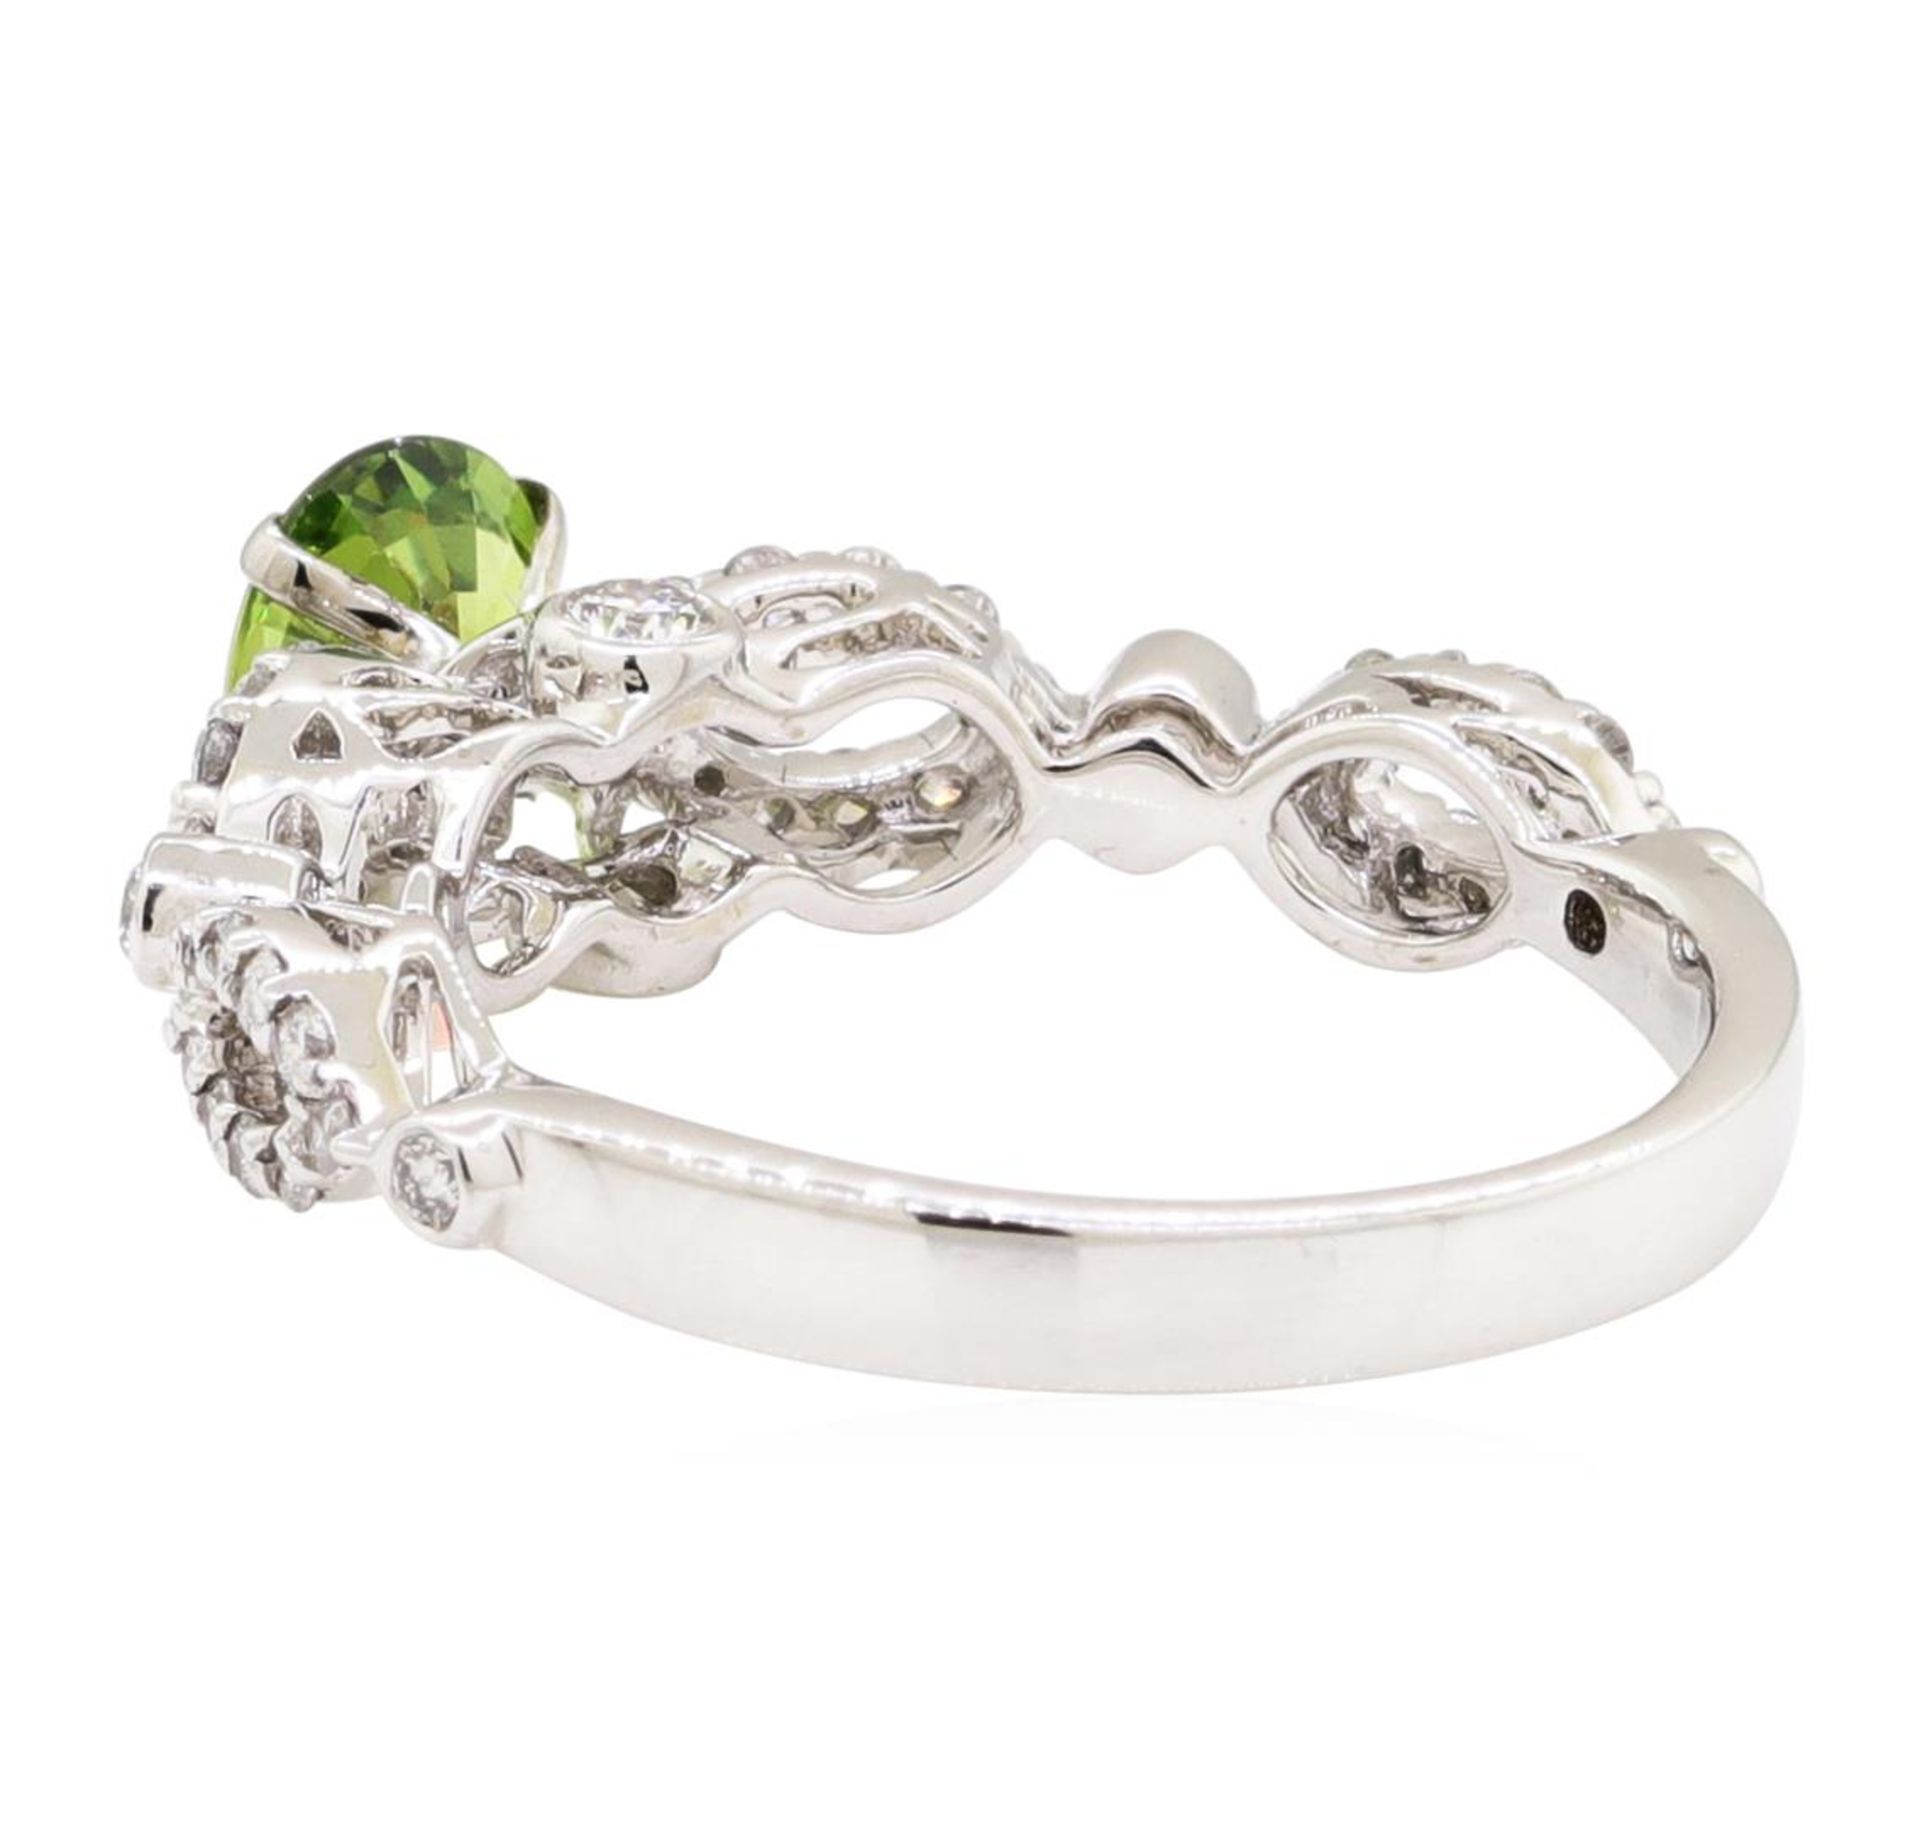 1.24 ctw Oval Mixed Demantoid Garnet And Round Brilliant Cut Diamond Ring - 14KT - Image 3 of 5